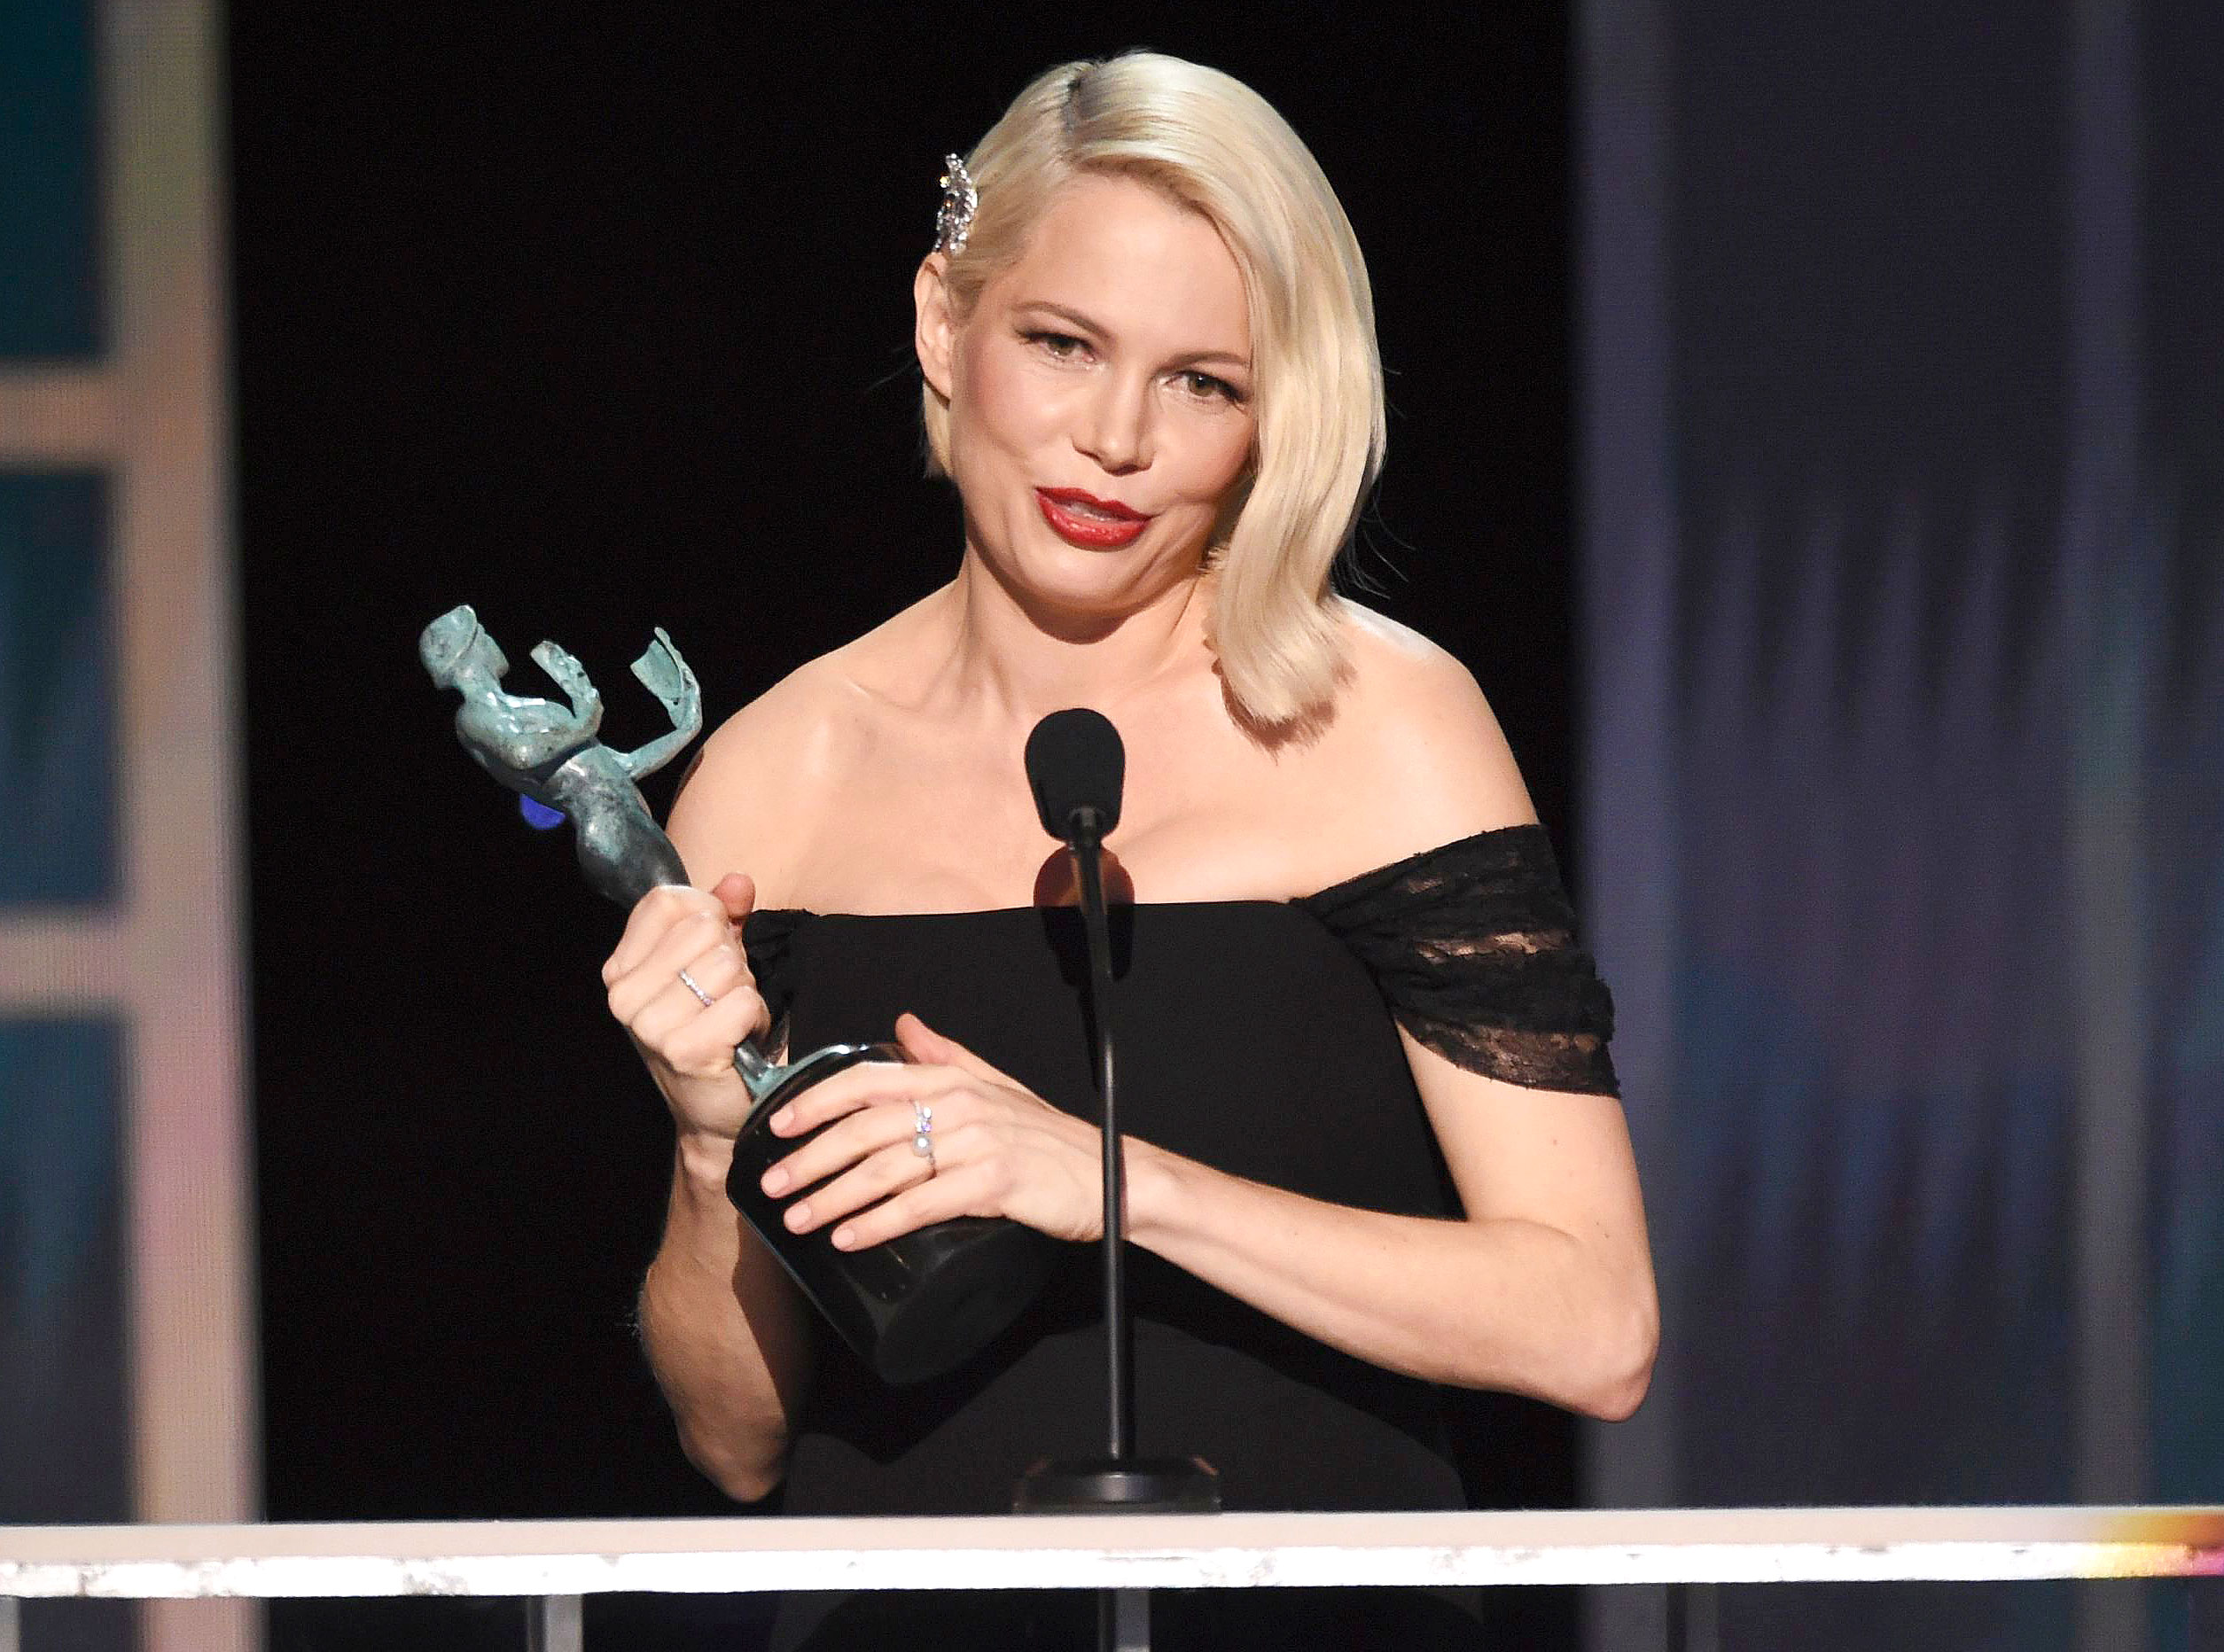 SAG Awards 2020: See the Show’s Biggest Moments